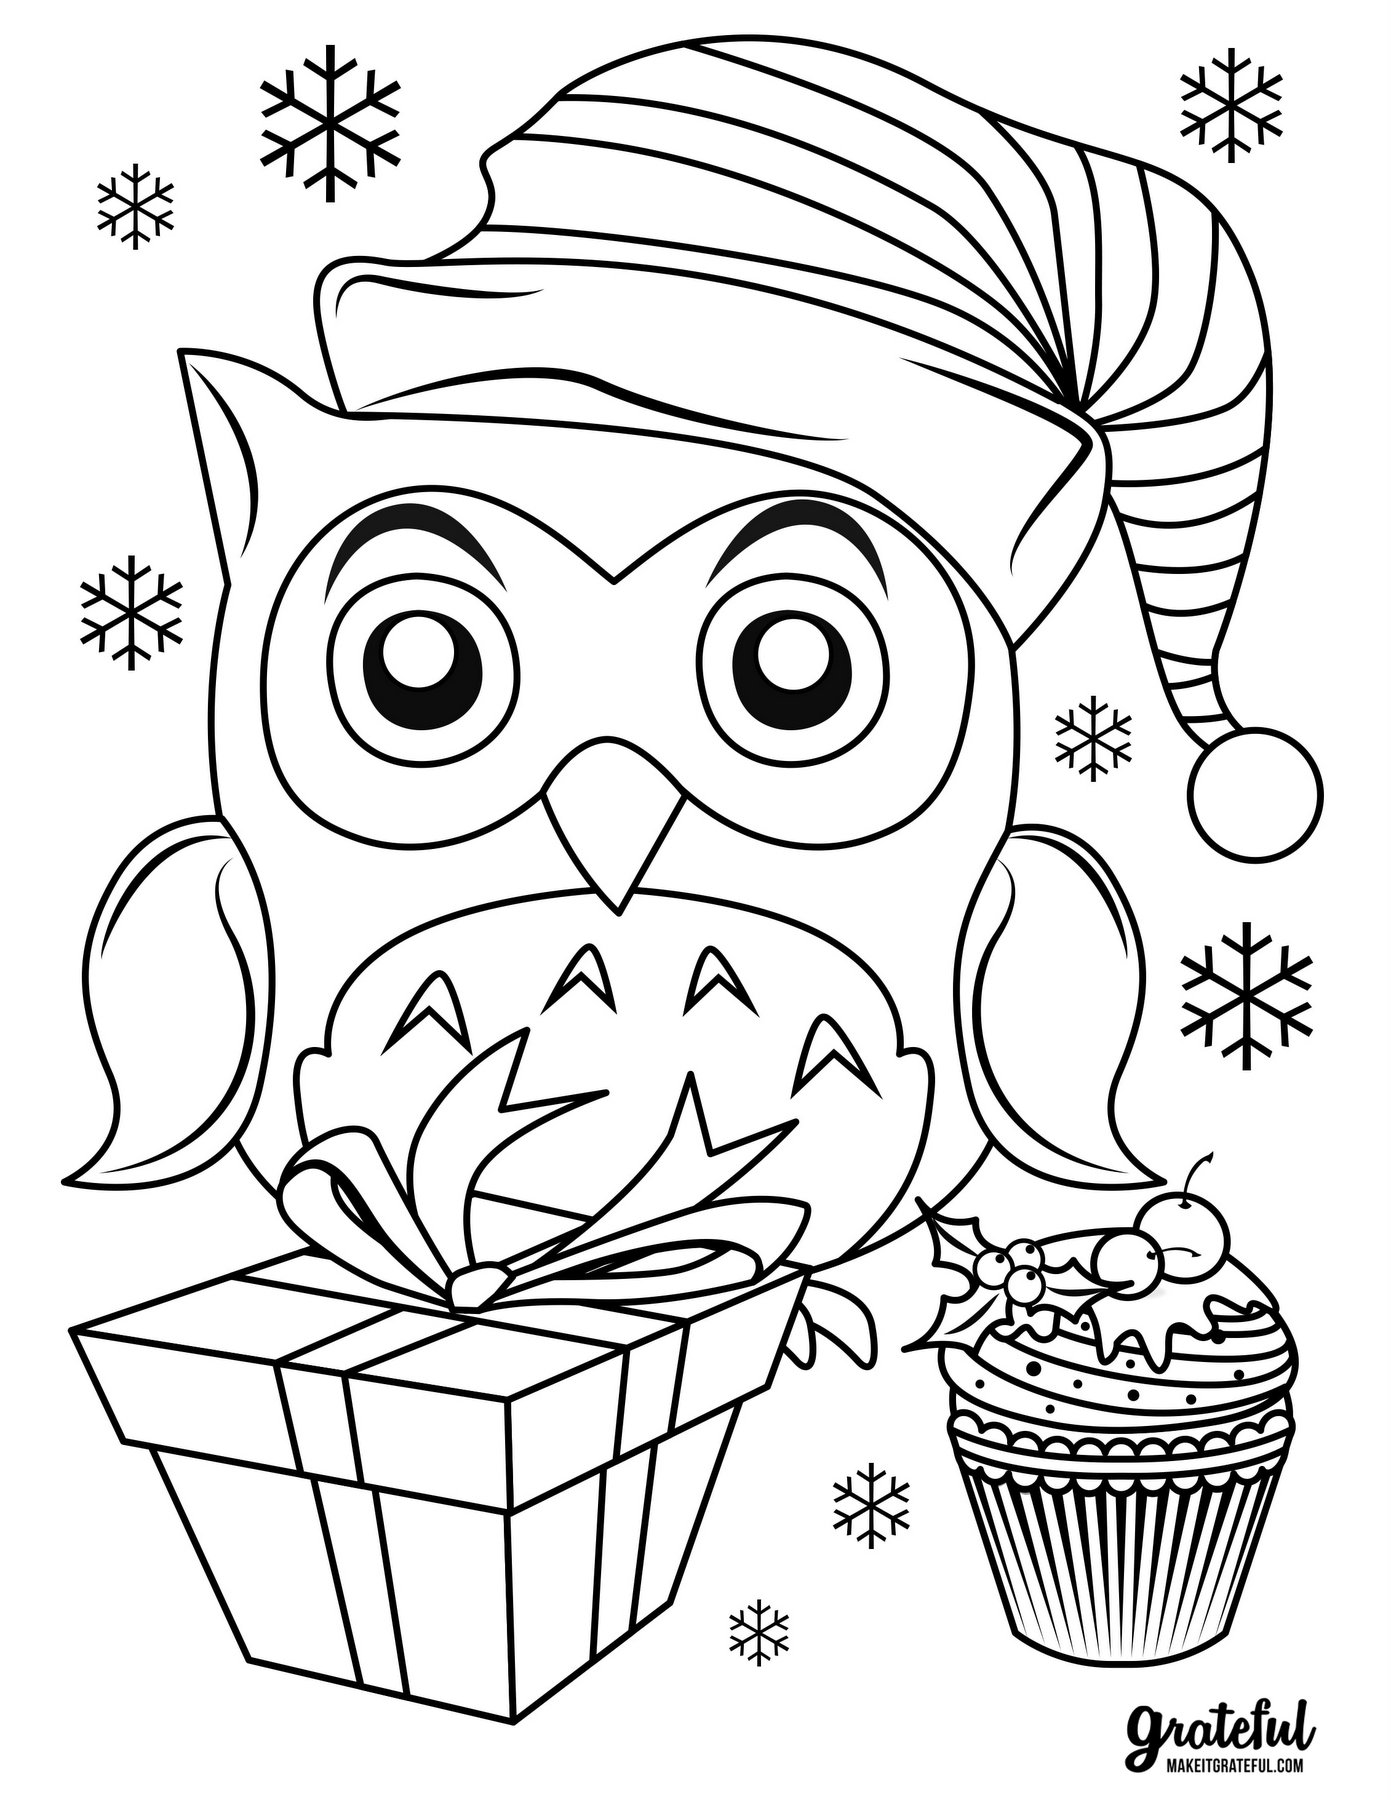 5-christmas-coloring-pages-your-kids-will-love